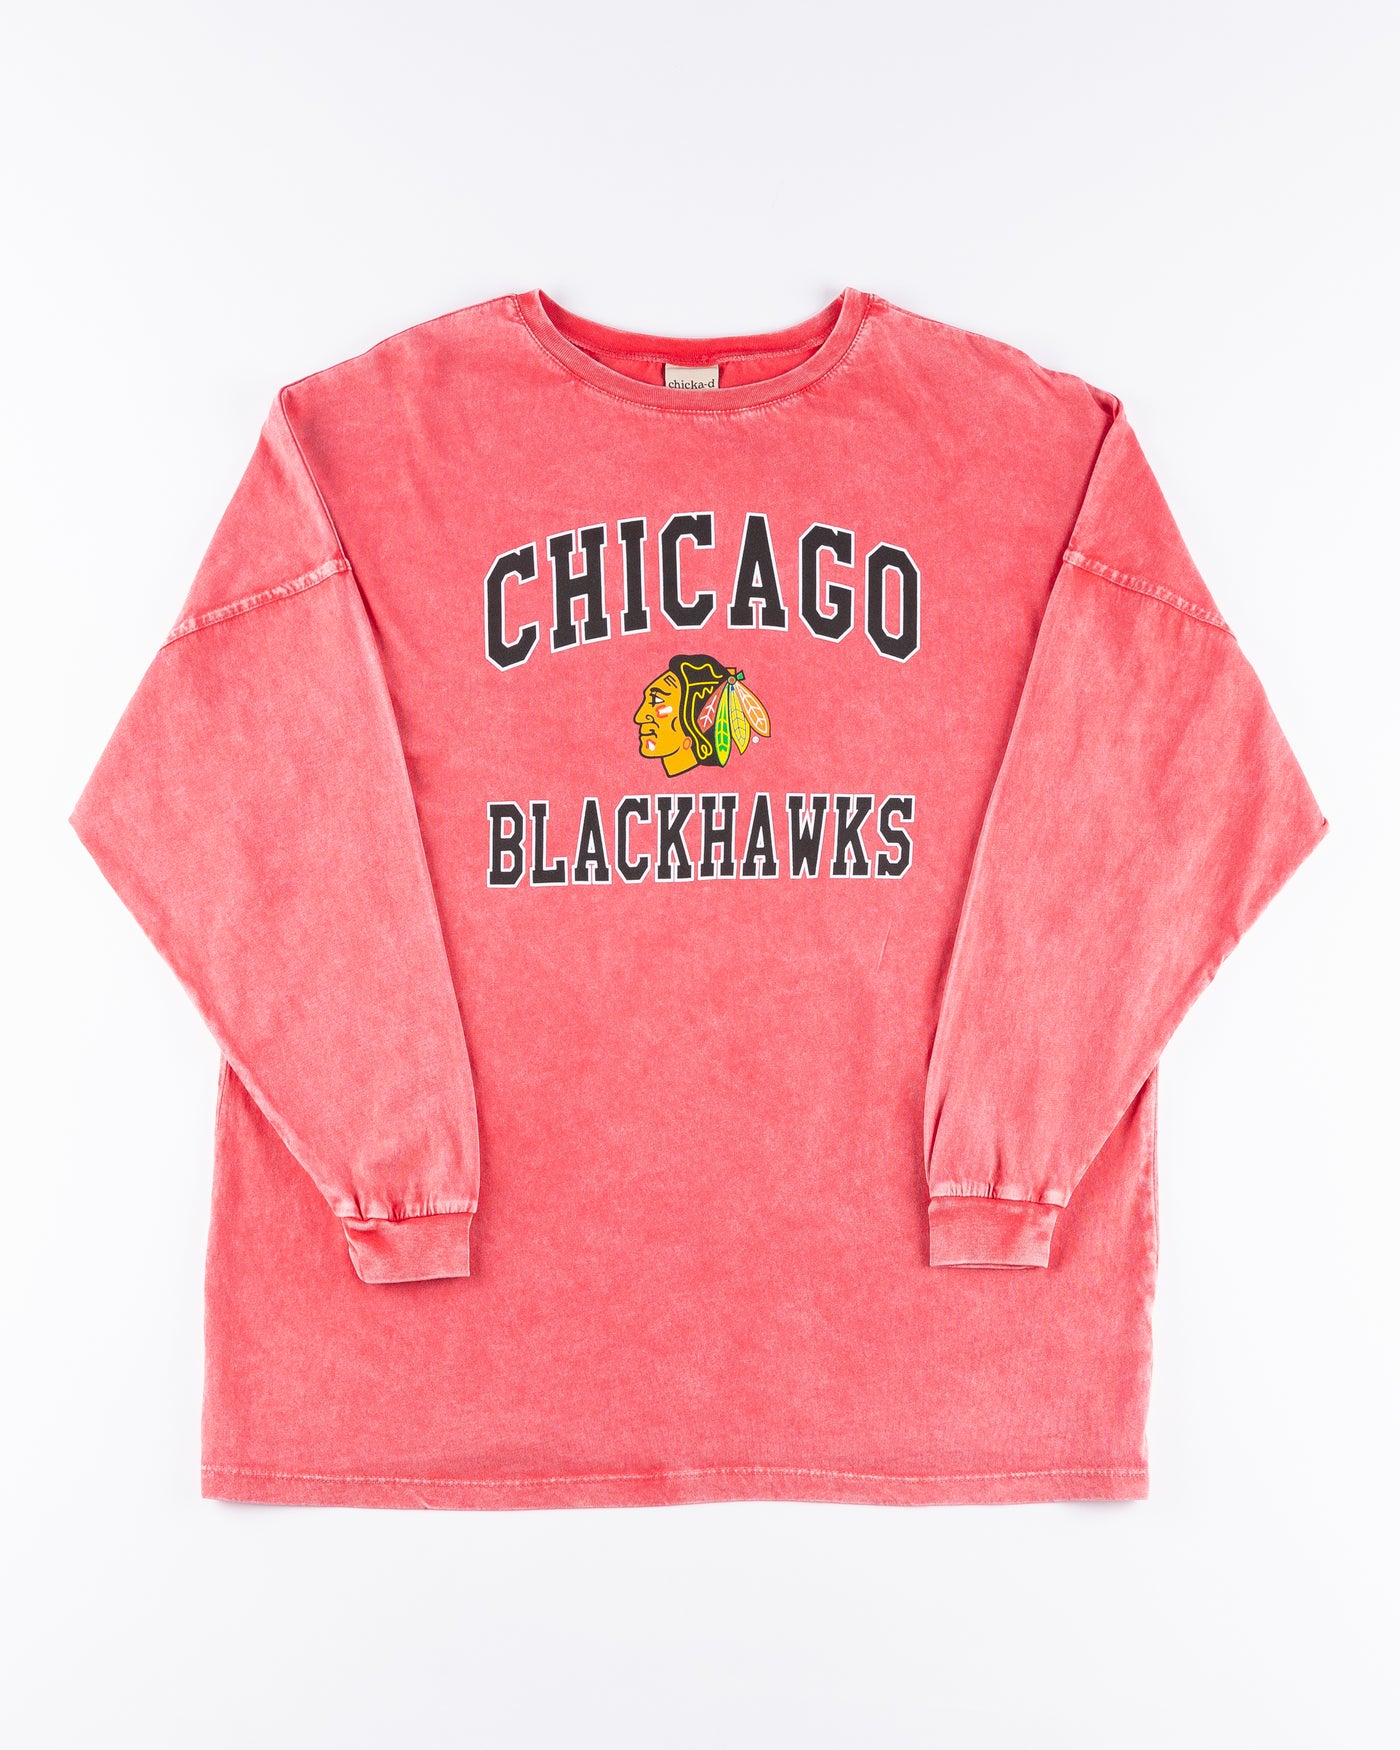 washed red chicka-d long sleeve tee with Chicago Blackhawks wordmark and primary logo - front lay flat